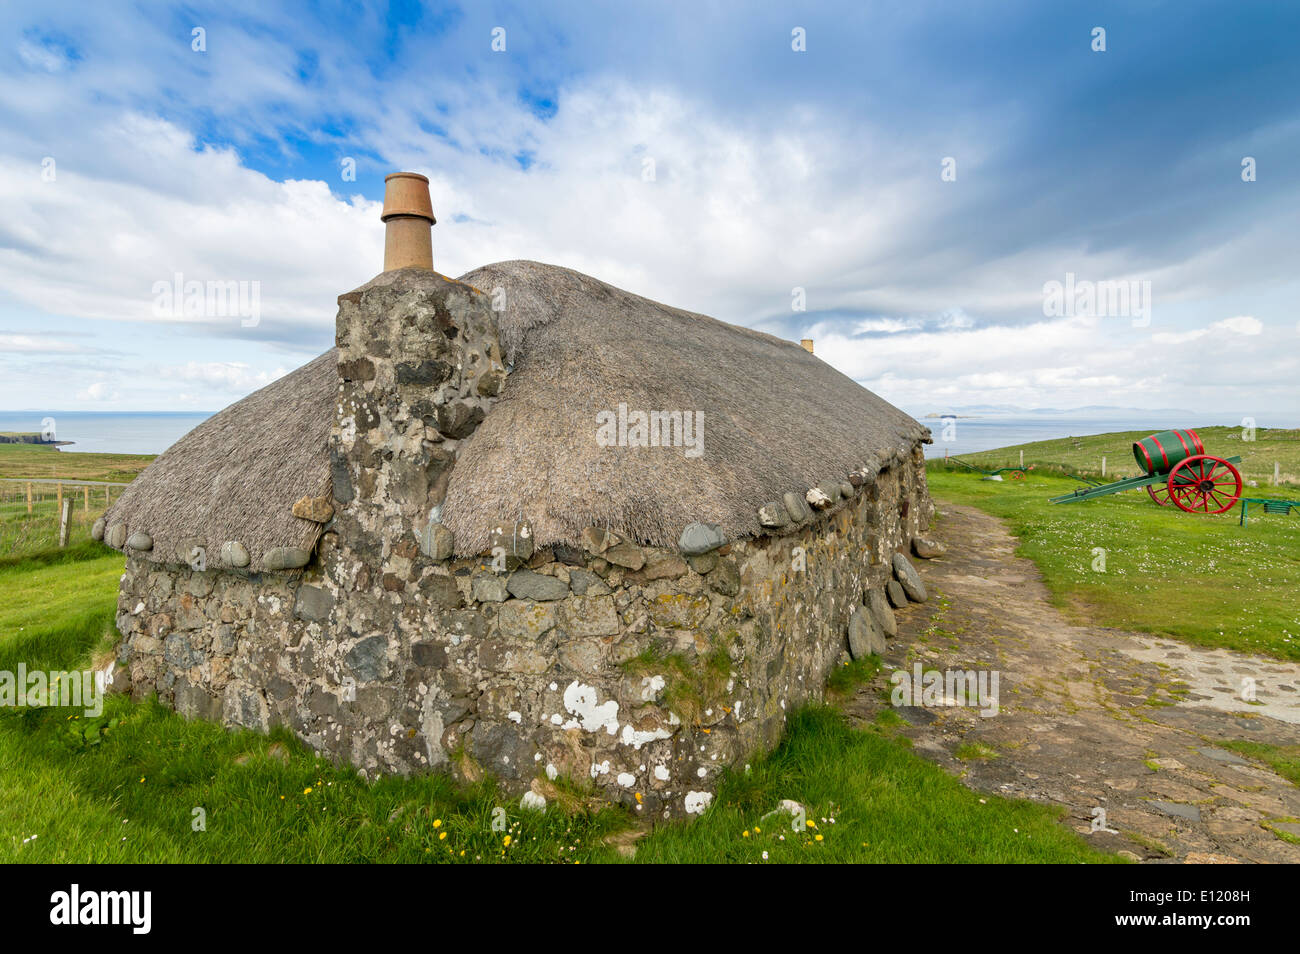 Thatch Roof On An Old Croft House Or Cottage Held Down By Stones